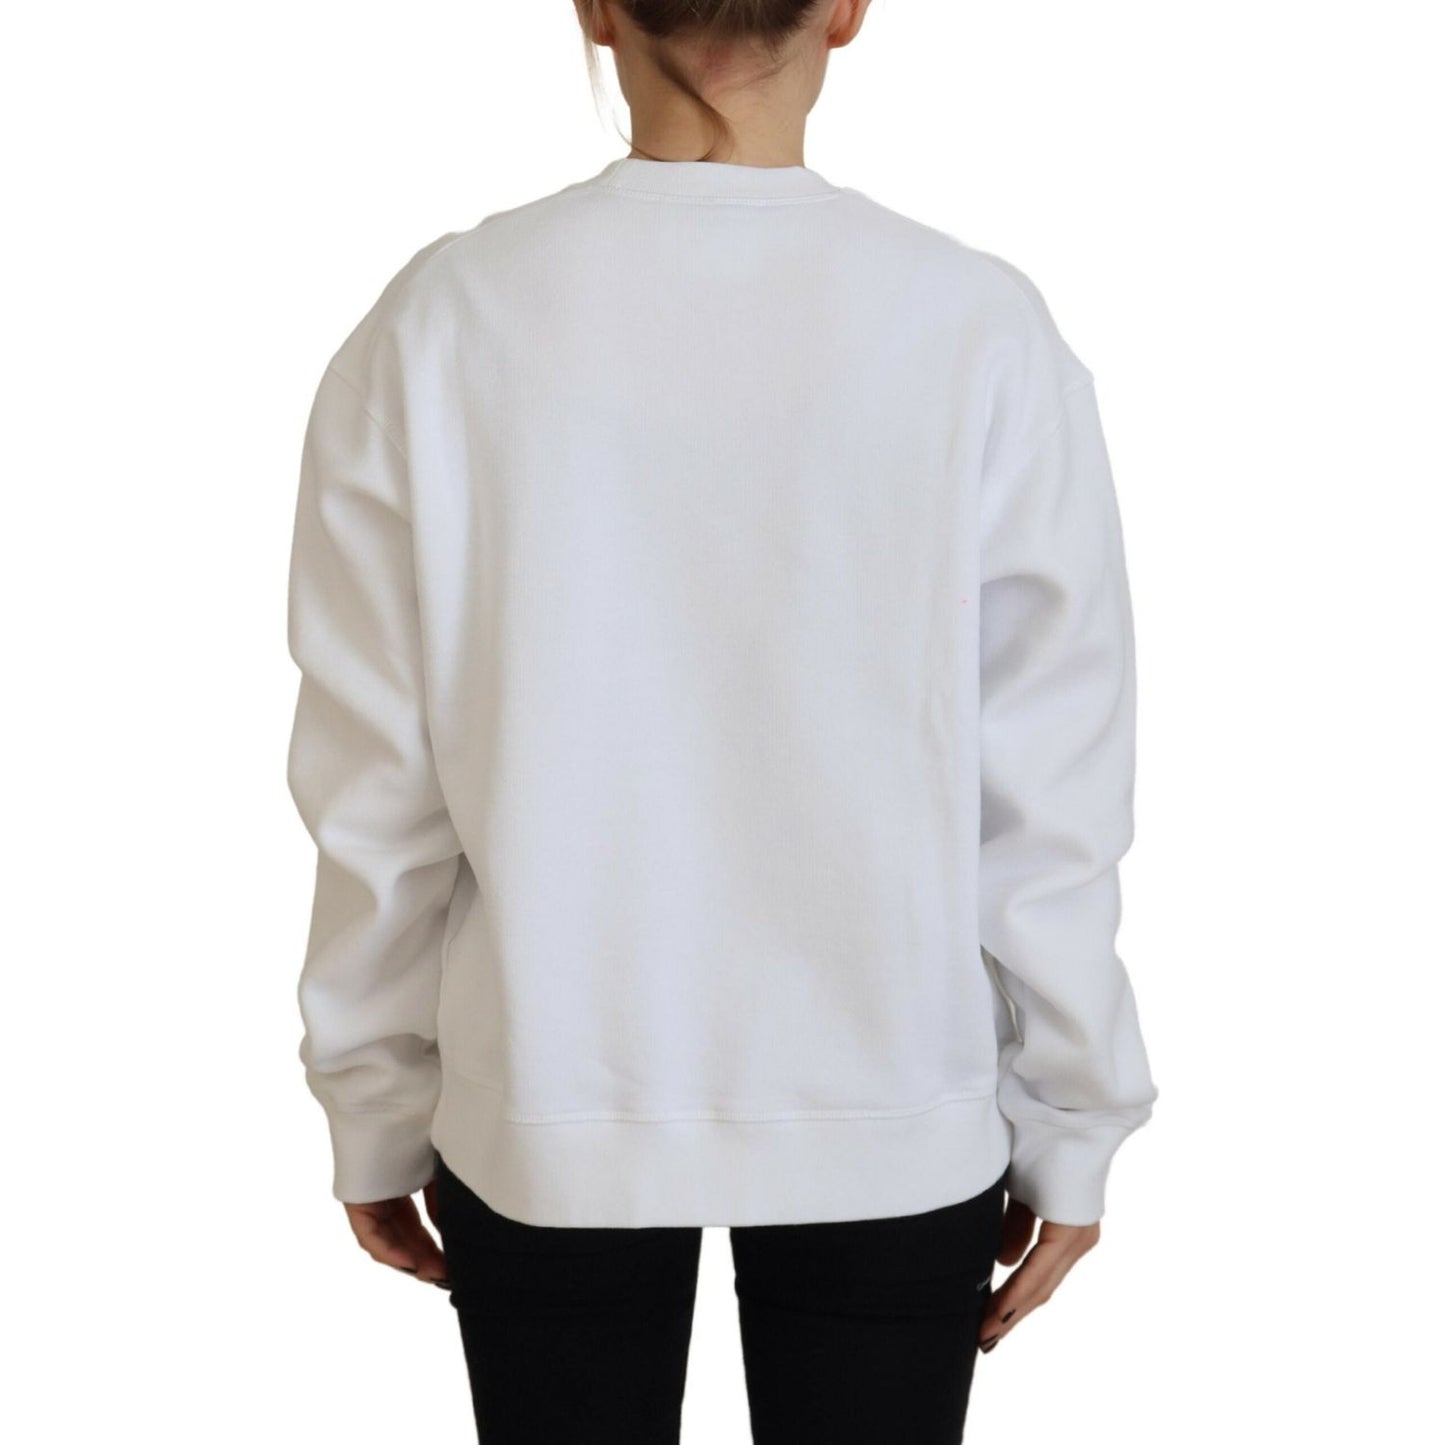 Dsquared² White Cotton Printed Long Sleeve Crew Neck Sweater white-cotton-printed-long-sleeve-crew-neck-sweater